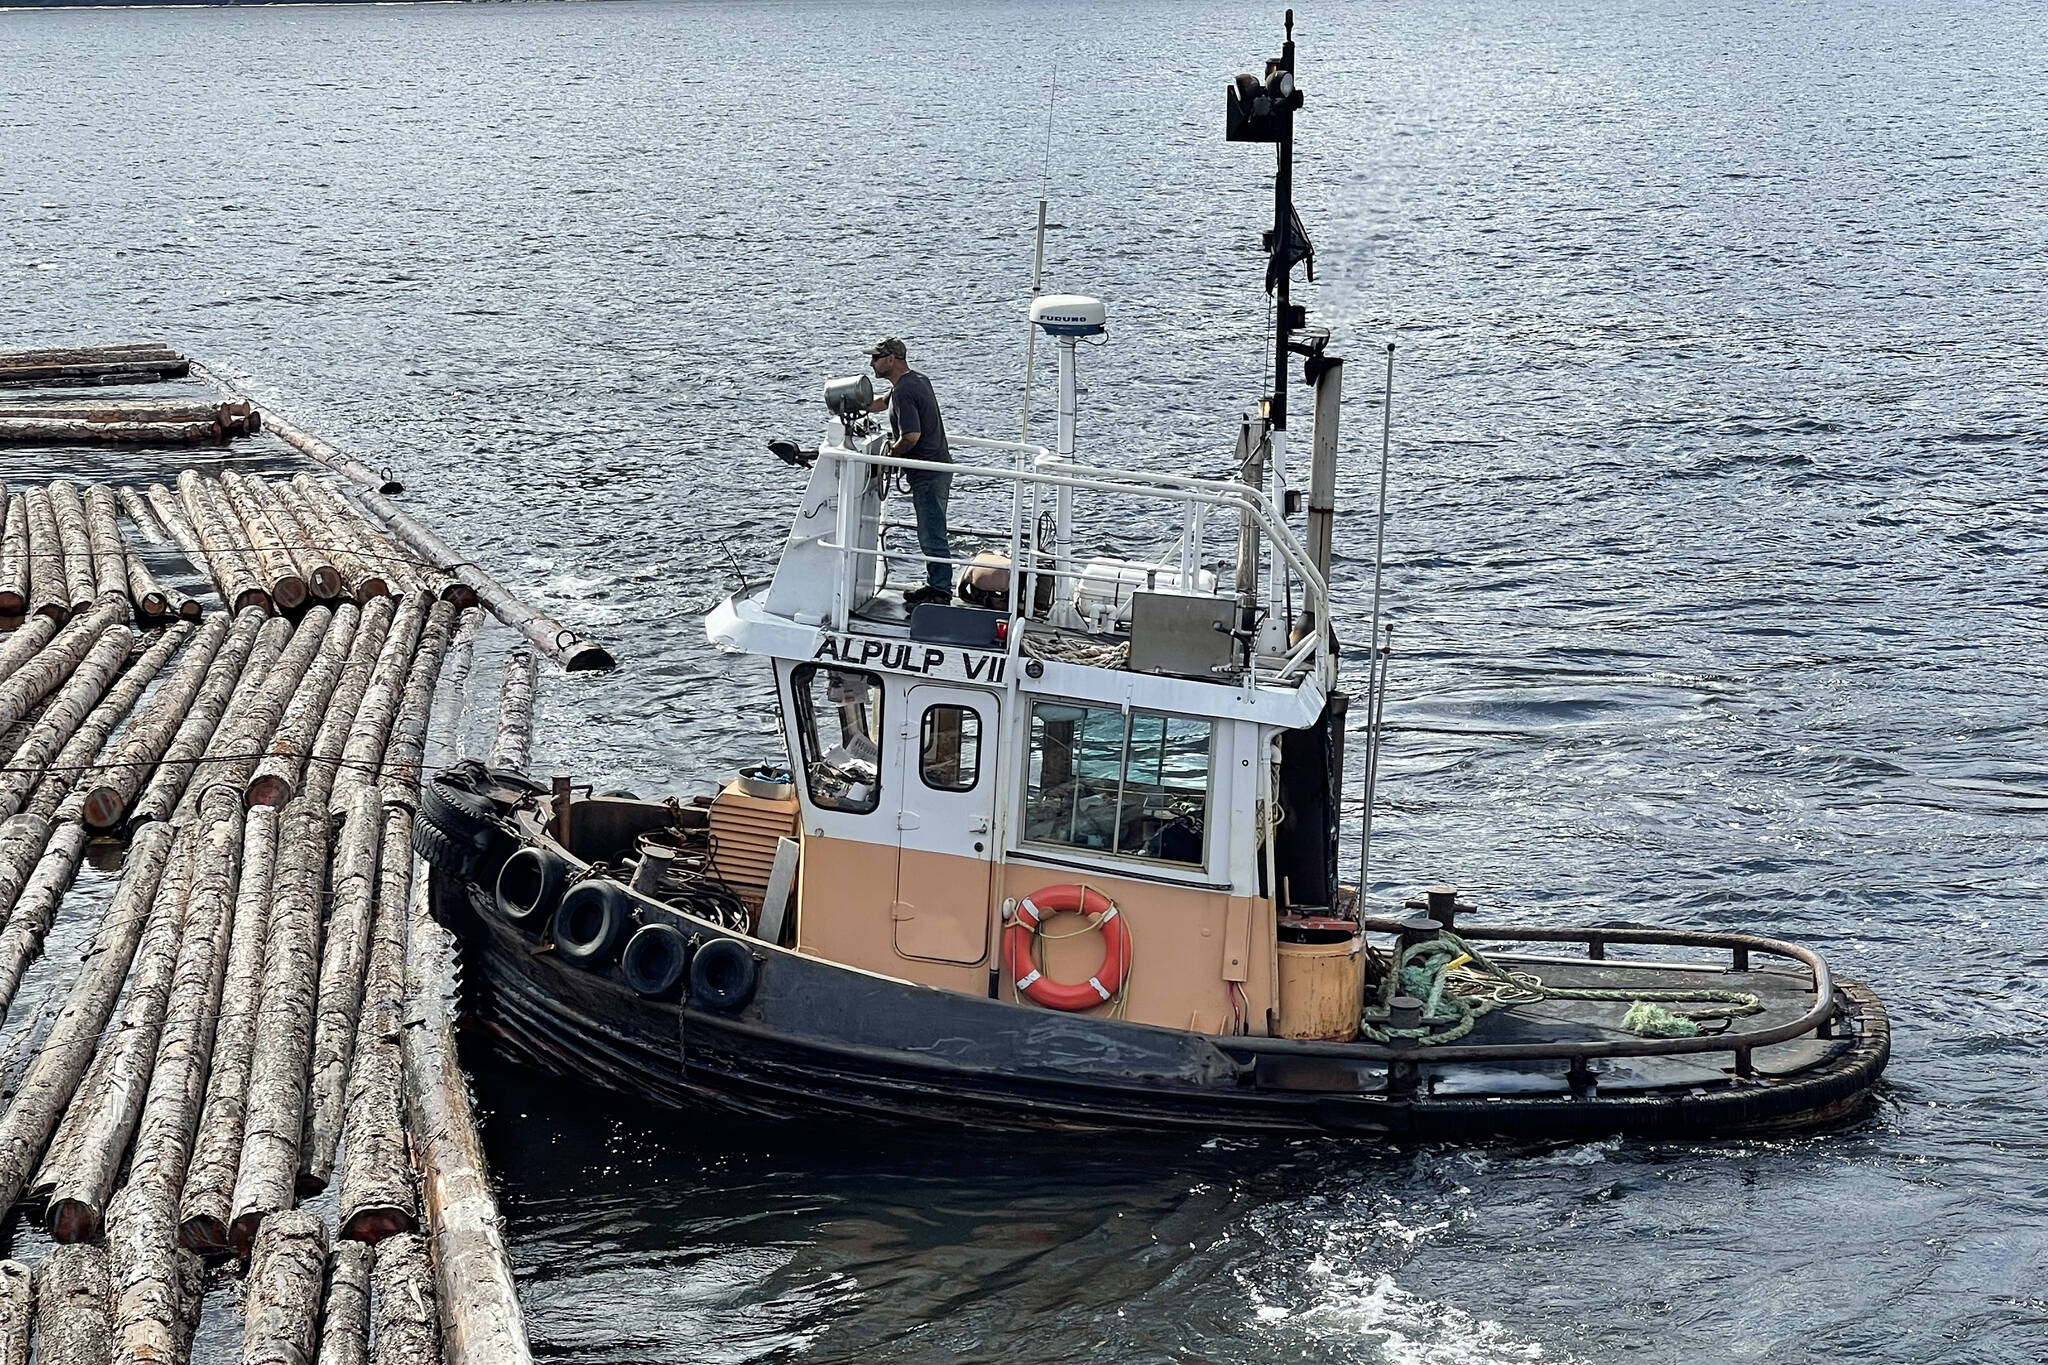 26518938_web1_210922-AVN-FORESTRY-CMEngineering-tugboats_2